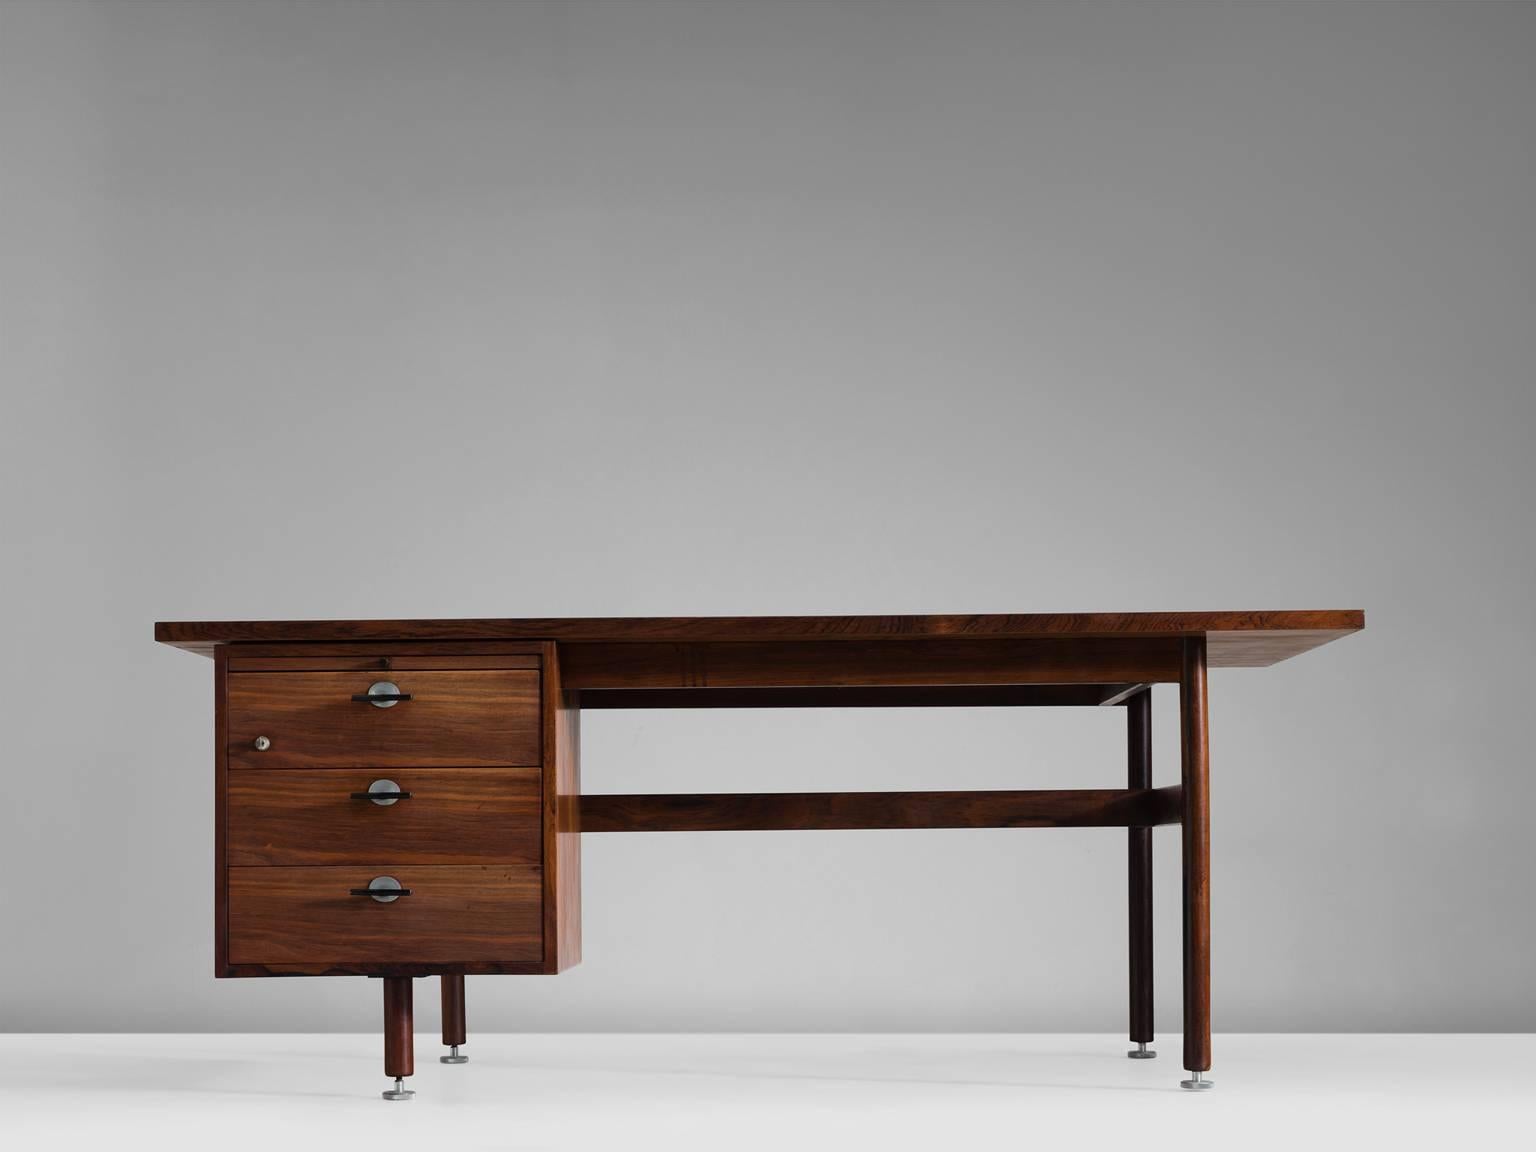 Executive desk in rosewood, by Jens Risom, Denmark, 1960s.

This well designed desk has three drawers on the left side, with nice black metal handles. The rectangular top has a nice rosewood grain, as well as the drawer fronts and legs.

The